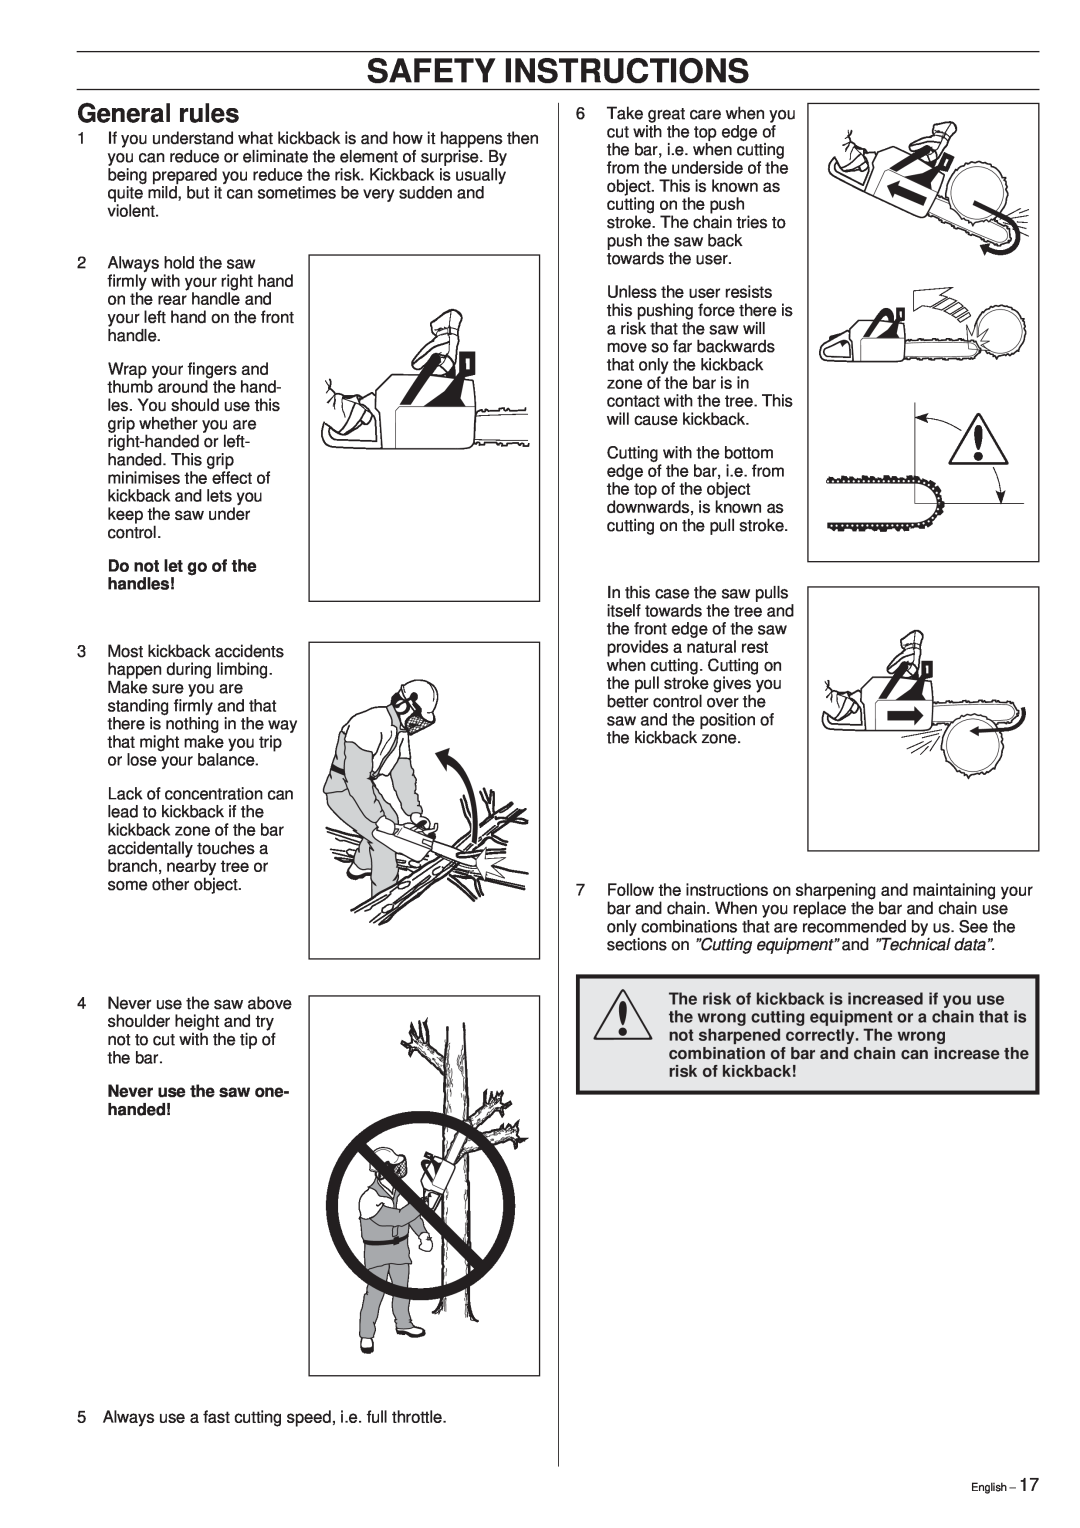 Husqvarna 261 manual Safety Instructions, General rules, Do not let go of the handles, Never use the saw one- handed 